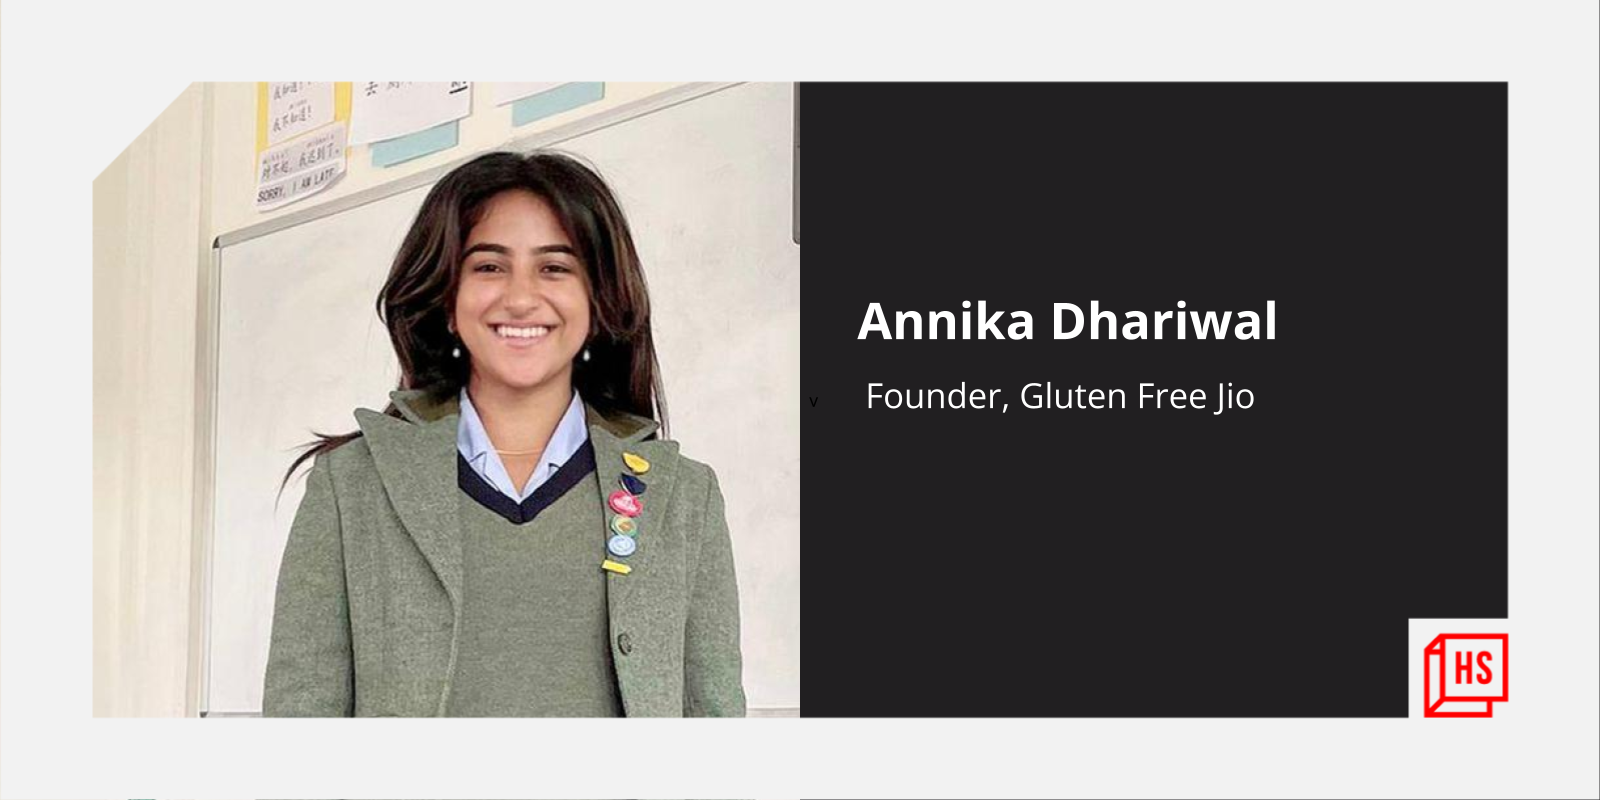 Meet 17-year-old Annika Dhariwal who is raising awareness about Celiac disease that affects 6-8 million Indians